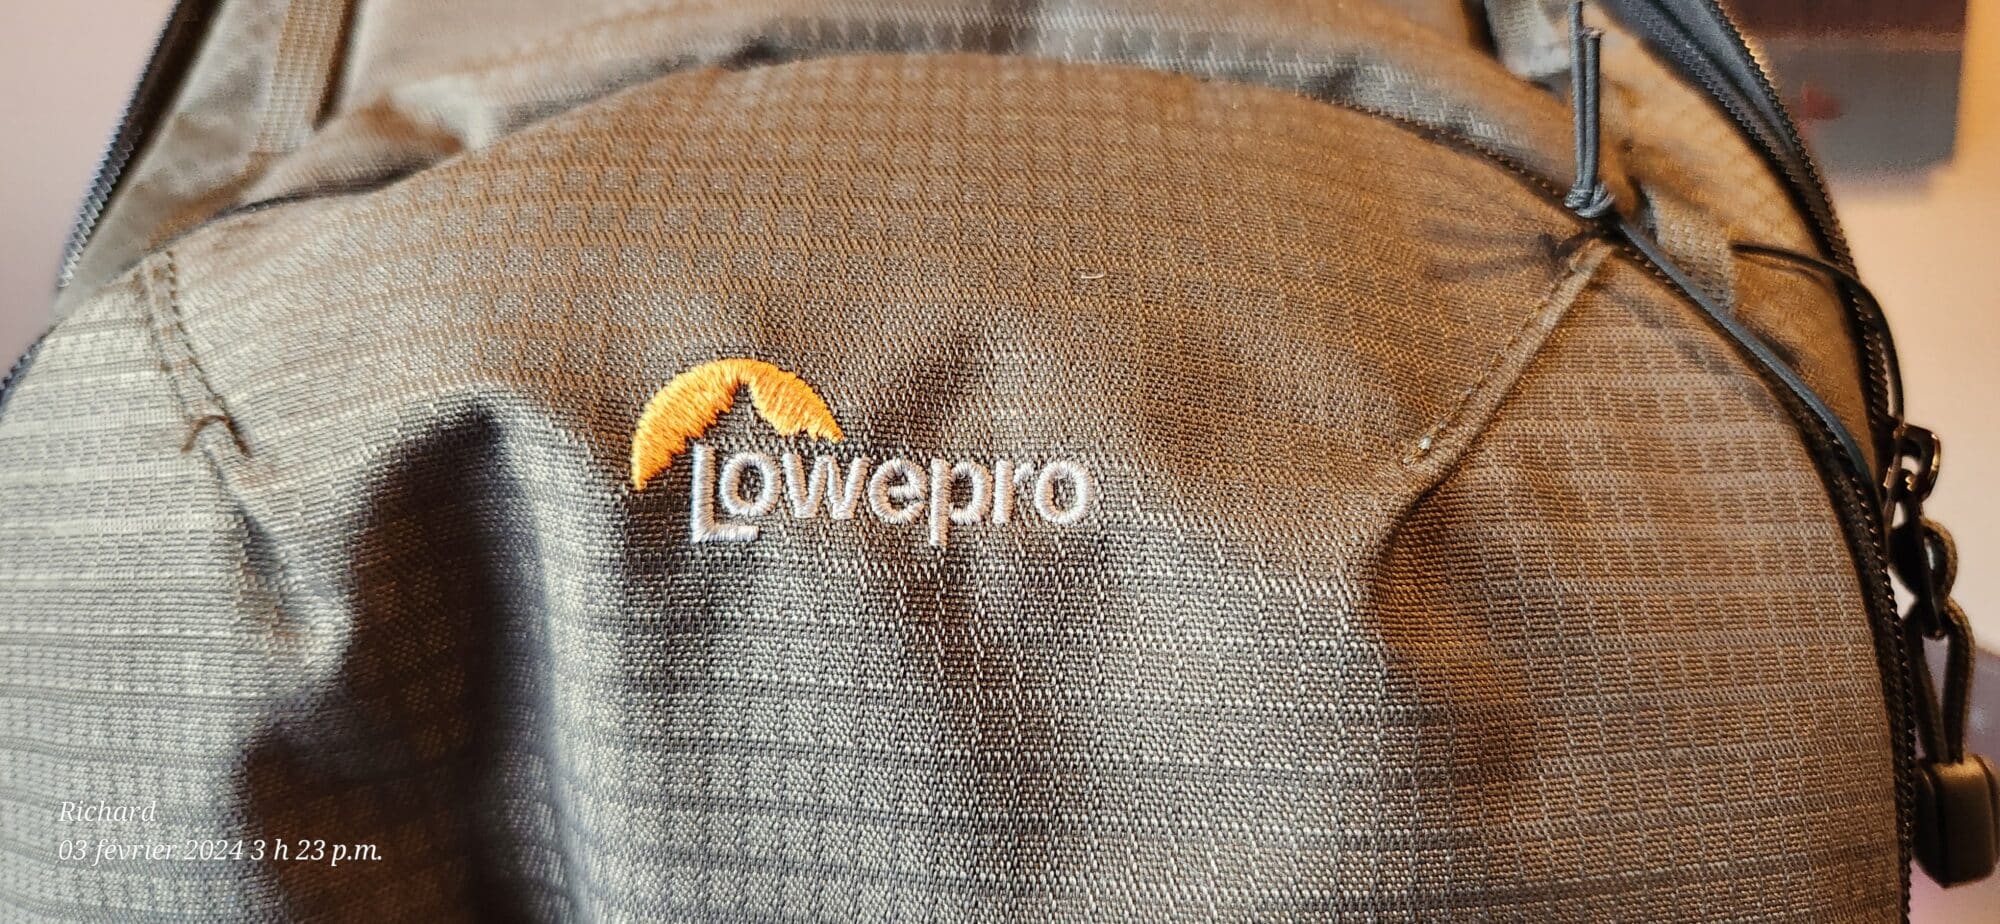 Lowpro impeccable cameras